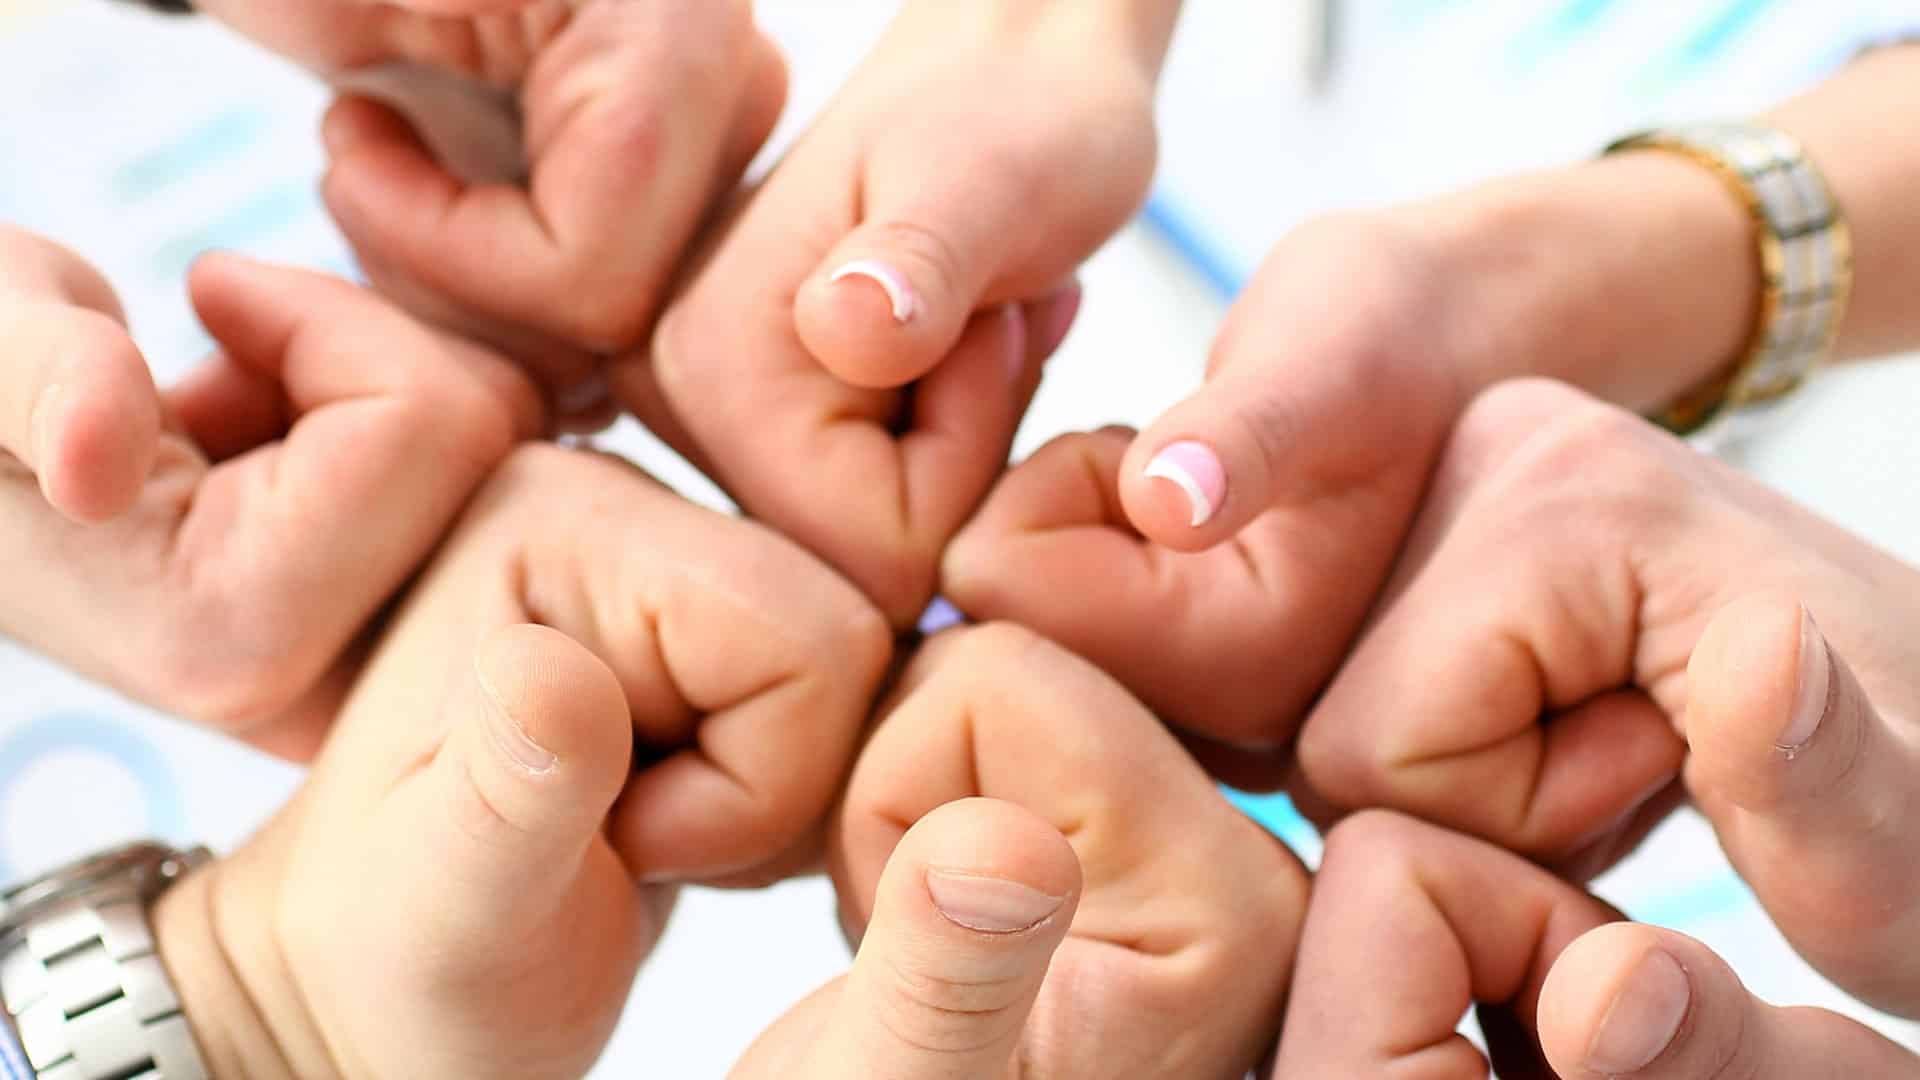 Group of people joining hands with thumbs up